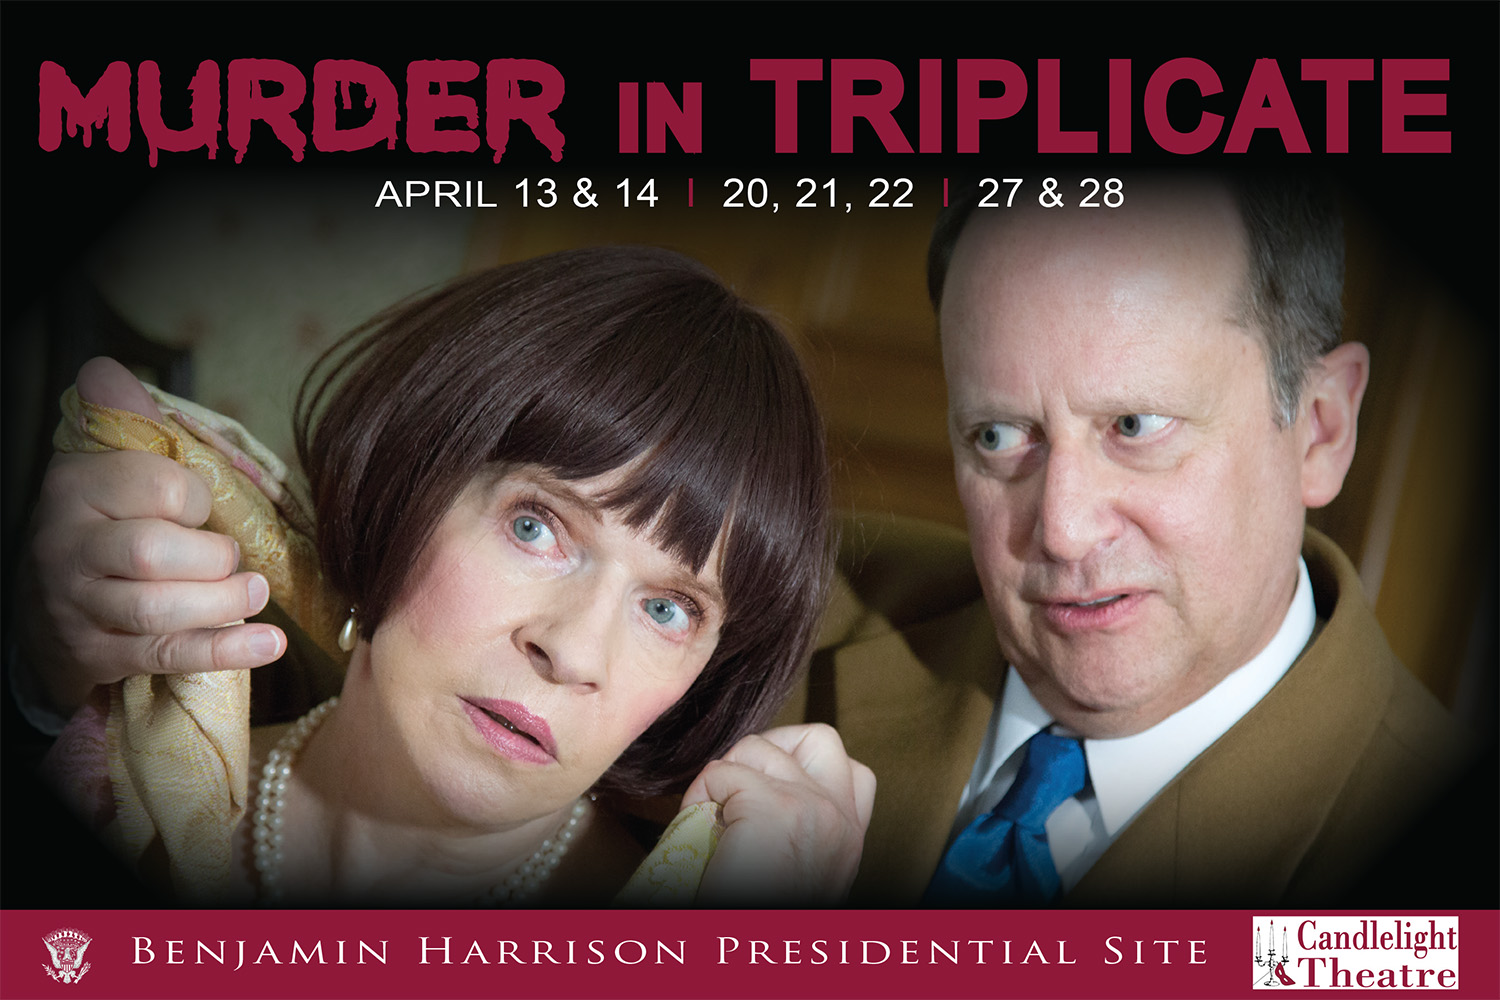 Photographic image of a man threateningly wrapping a scarf around an unsuspecting woman's throat. Text reads: Murder in Triplicate. April 13 and 14. 20 21 22. 27 and 28. Benjamin harrison presidential site, candlelight theatre.